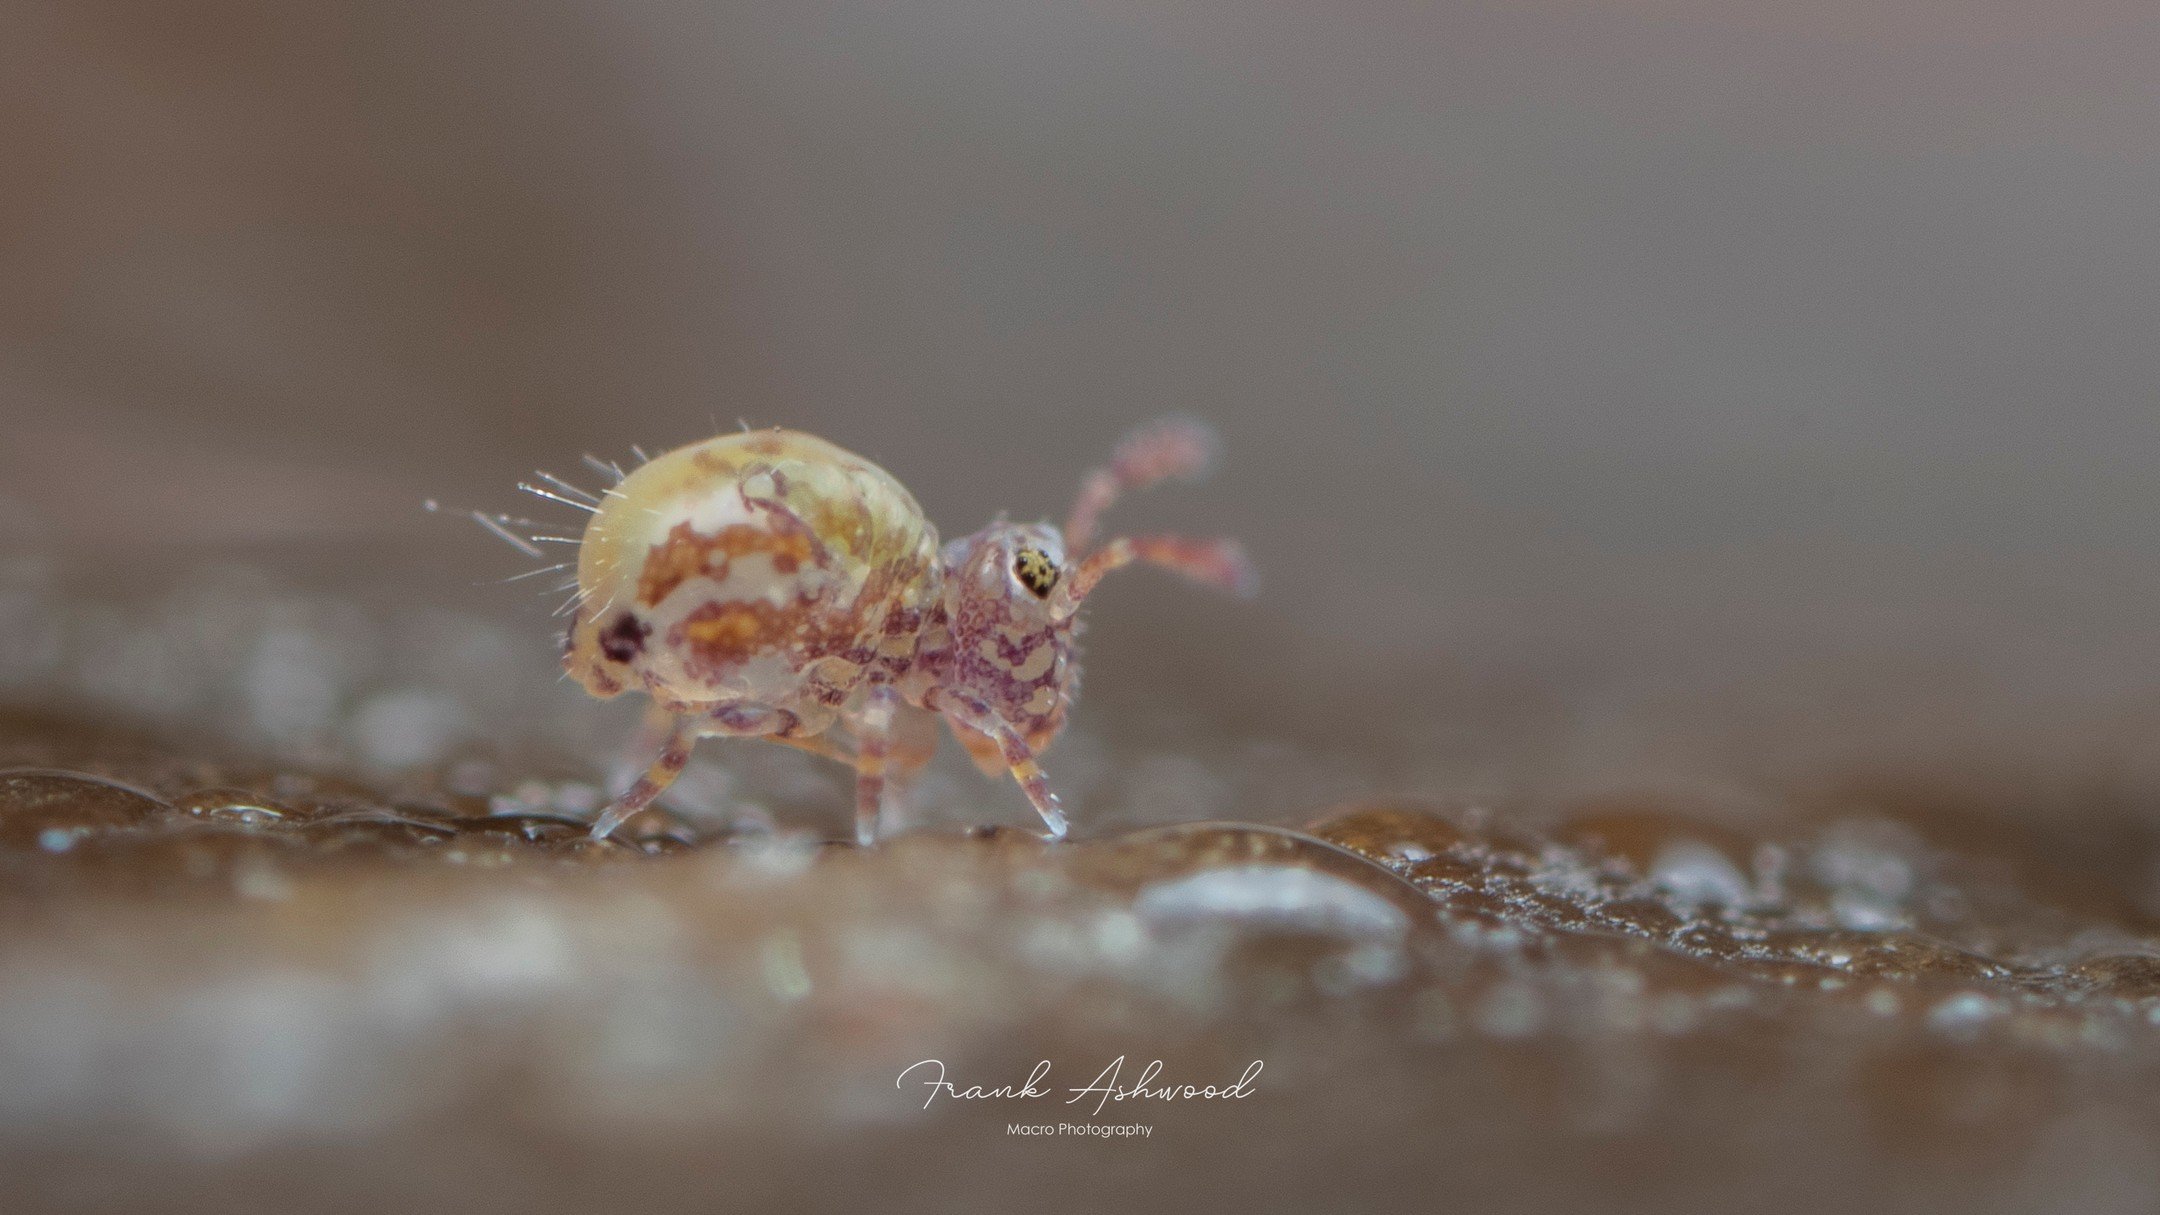 I finally managed to get back out with my camera for some macrophotography this weekend, and found some amazing soil invertebrates. First up, this juvenile globular springtail (Calvatomina superba)... What a cutie!

I'll share the rest over the comin